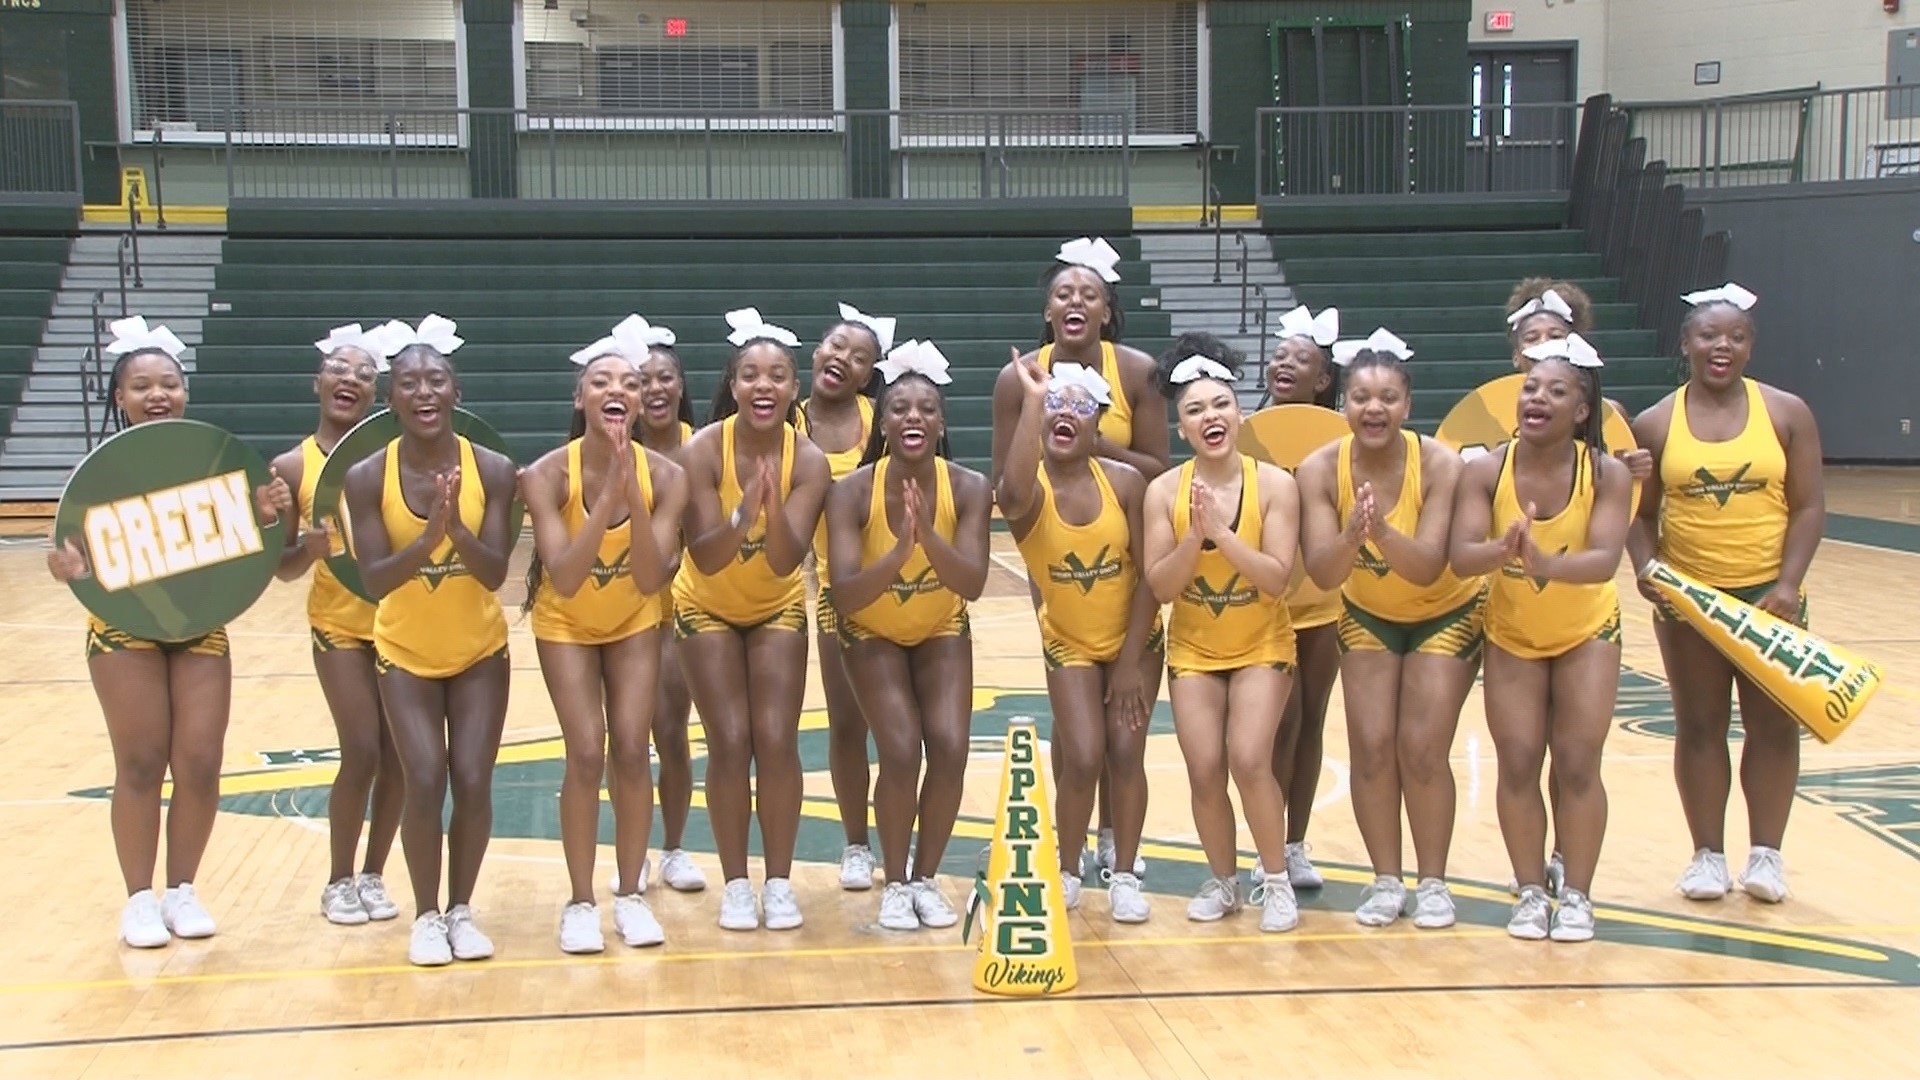 Spring Valley High School's cheerleaders ring in the new school year for students in Richland Two.